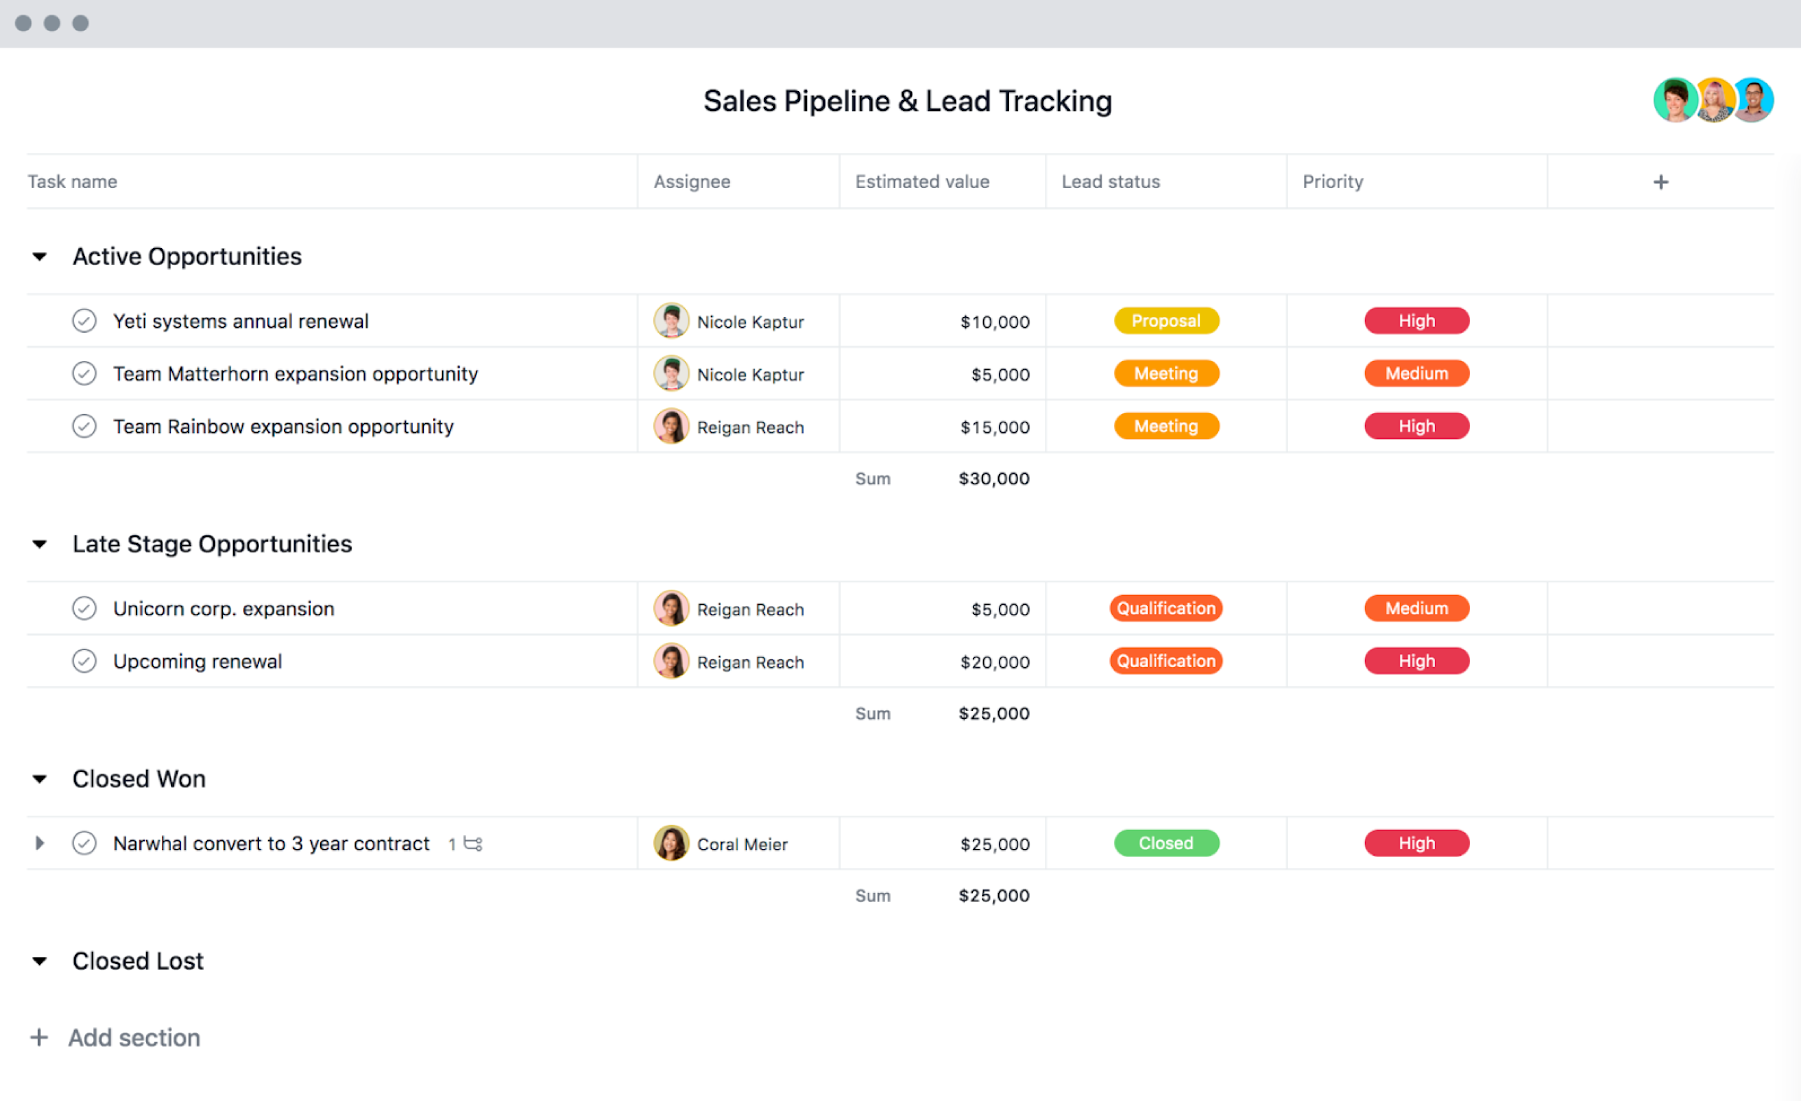 [List view] Sales pipeline template in Asana, spreadsheet-style view